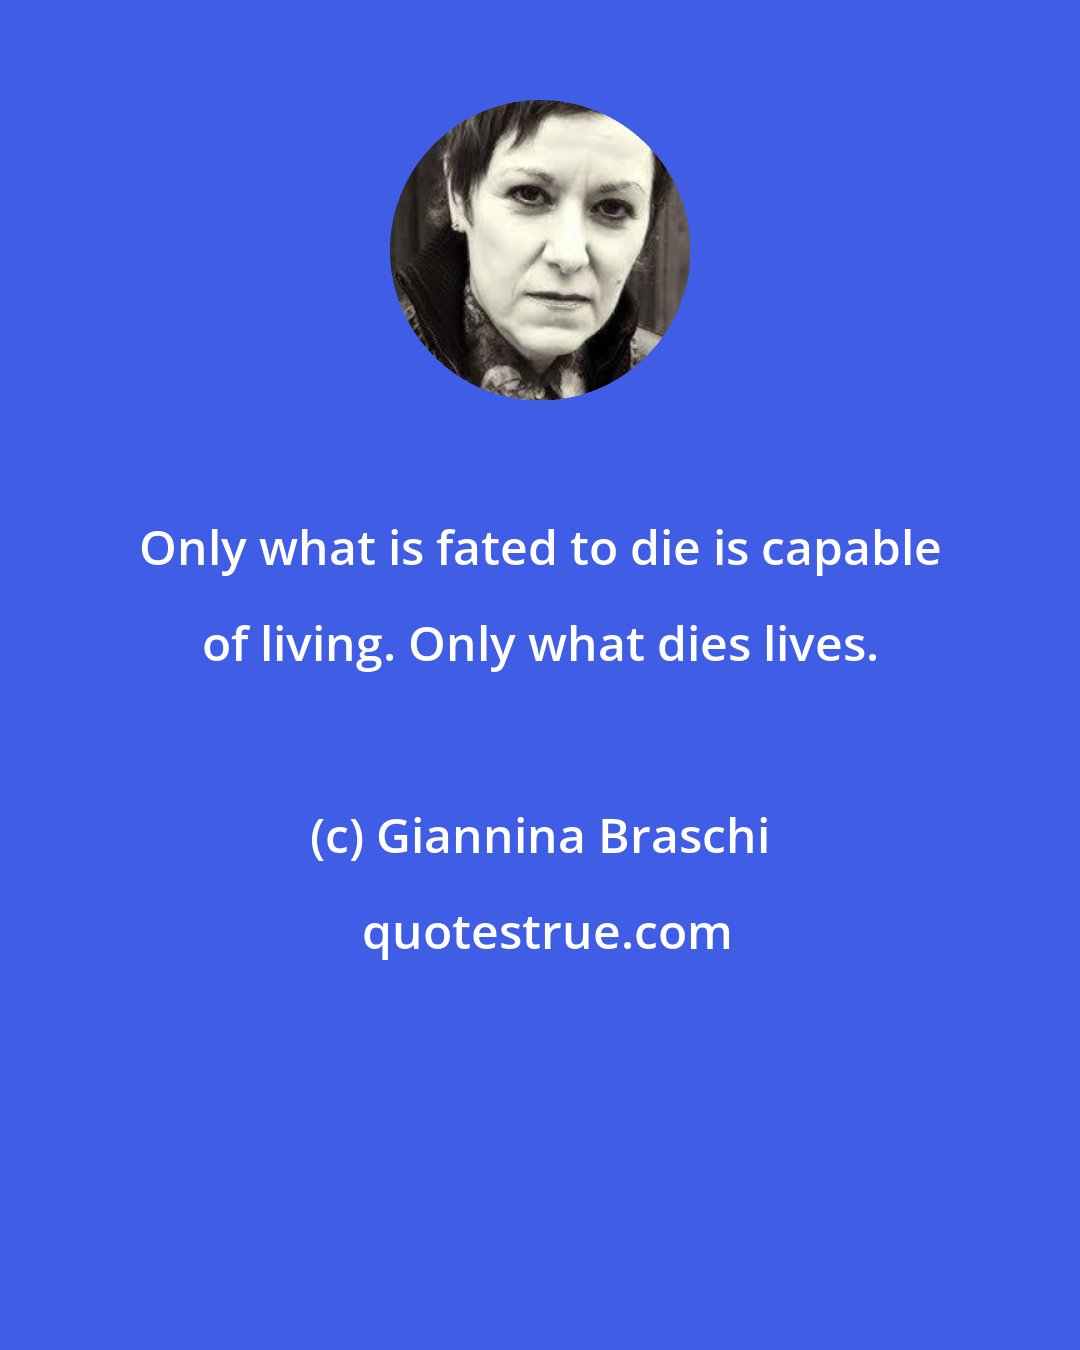 Giannina Braschi: Only what is fated to die is capable of living. Only what dies lives.